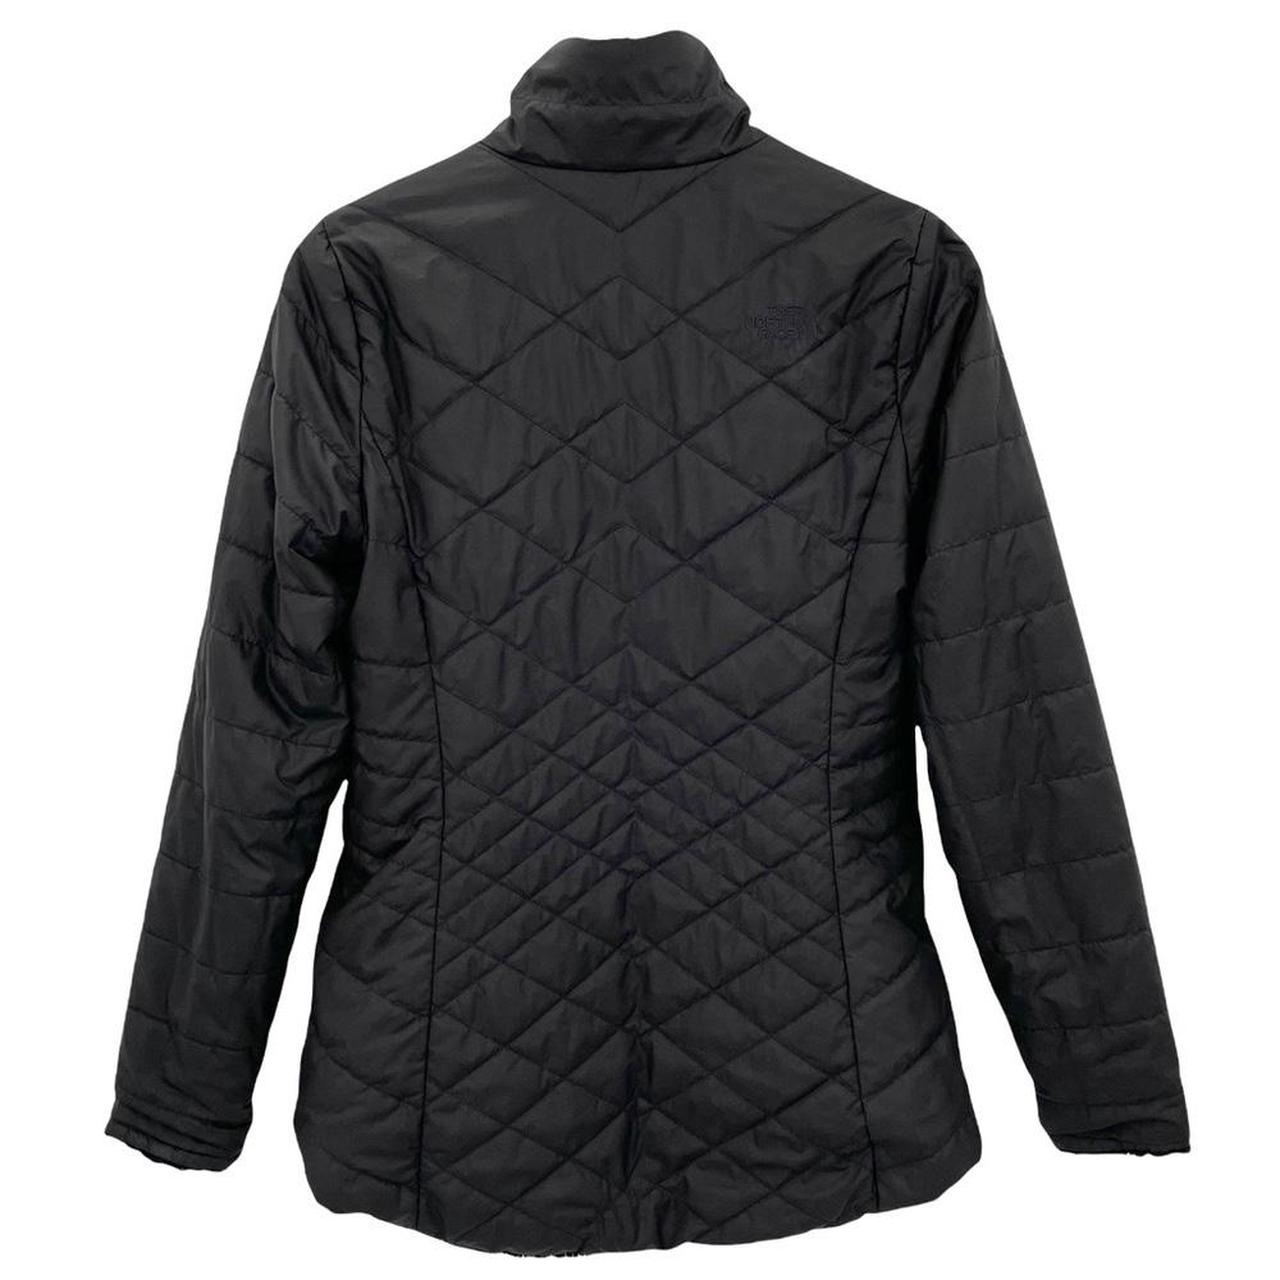 Product Image 3 - The North Face Women's Mossbud